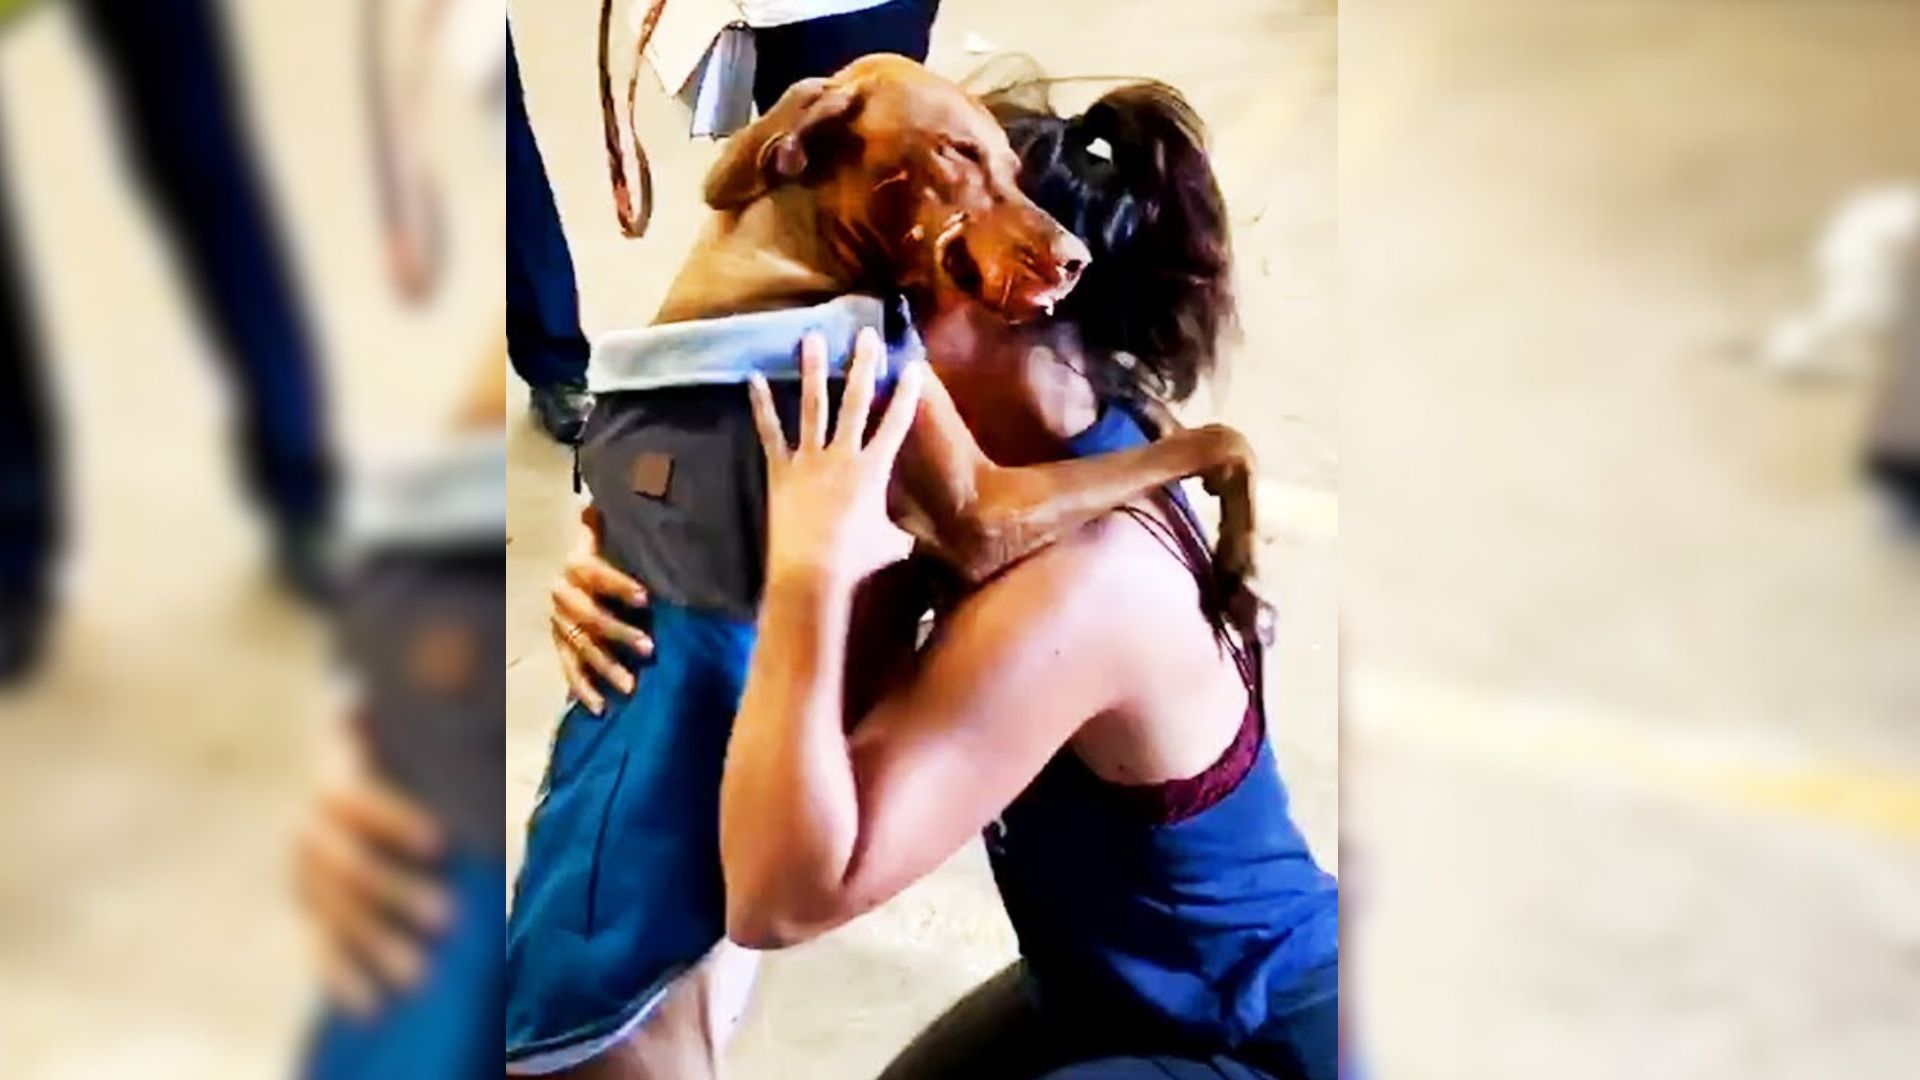 After Parting Ways, Woman And Her Beloved Dog Find Each Other Again In A Heartwarming Reunion